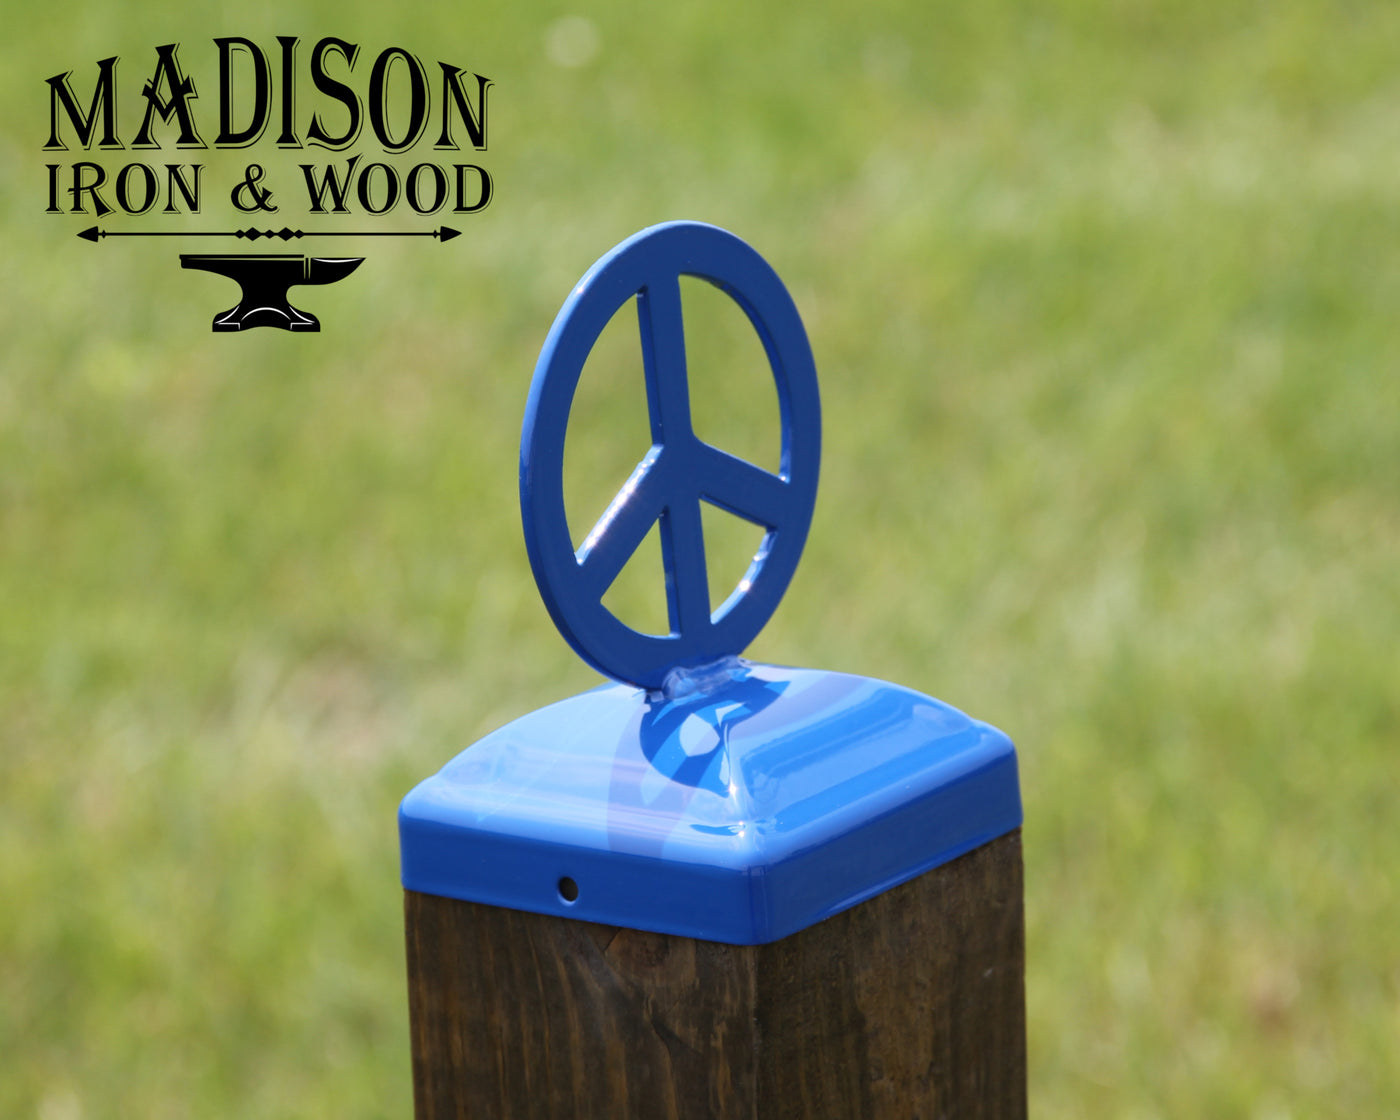 4x4 Peace Symbol Post Cap - Madison Iron and Wood - Post Cap - metal outdoor decor - Steel deocrations - american made products - veteran owned business products - fencing decorations - fencing supplies - custom wall decorations - personalized wall signs - steel - decorative post caps - steel post caps - metal post caps - brackets - structural brackets - home improvement - easter - easter decorations - easter gift - easter yard decor